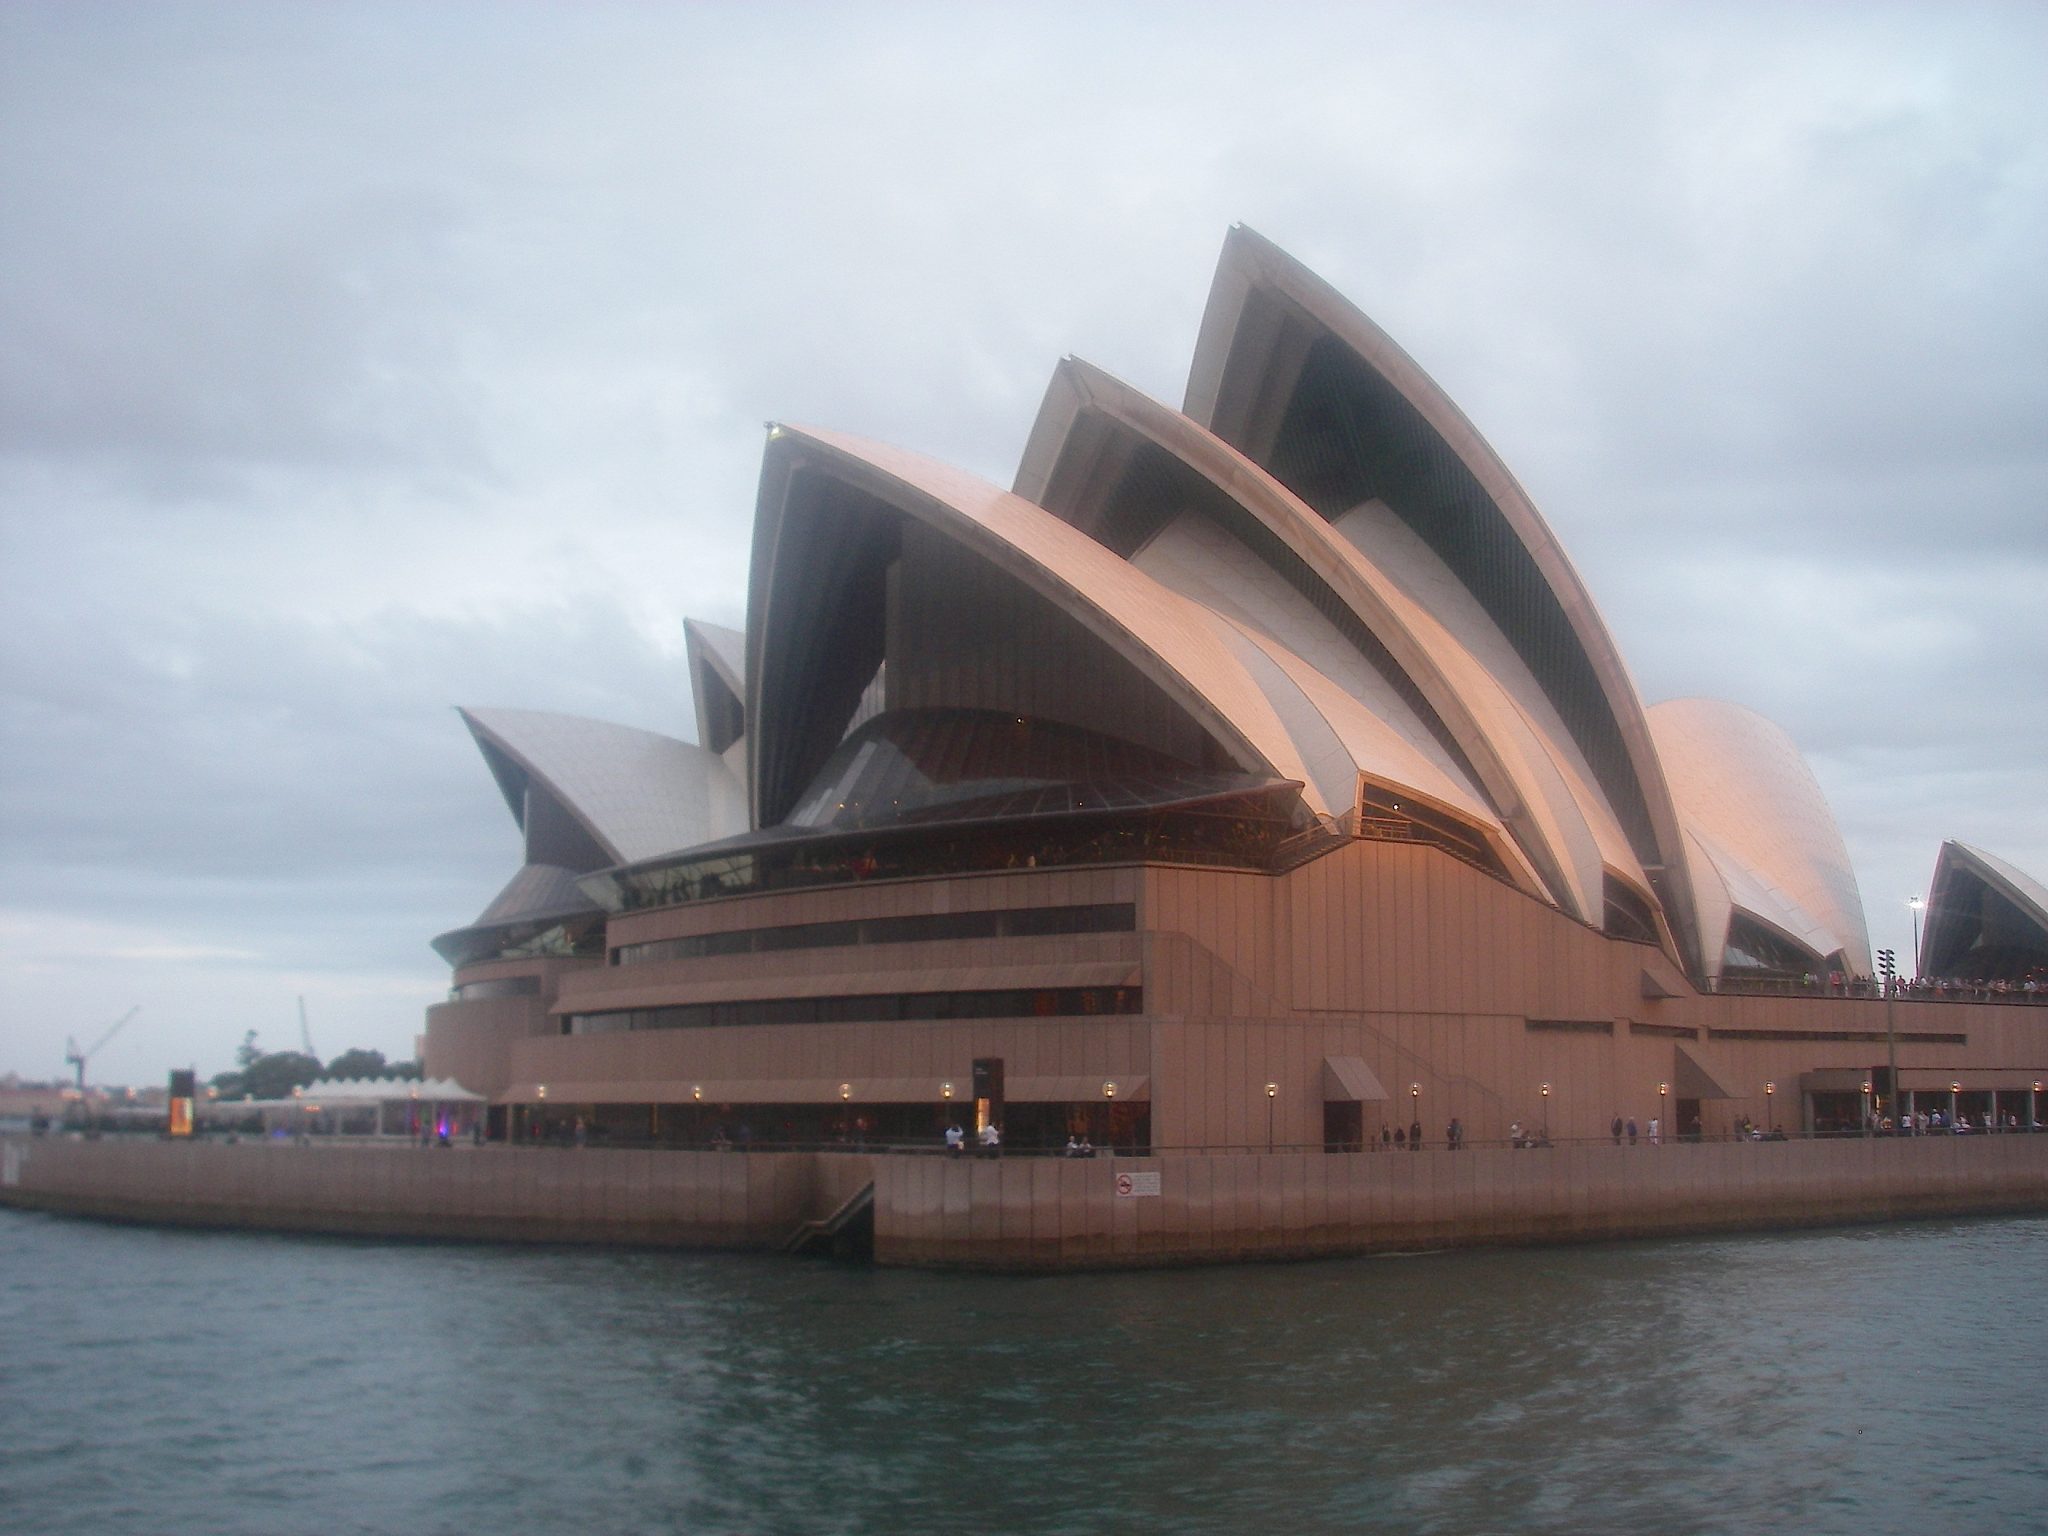 100. Another view of the Sydney Opera House